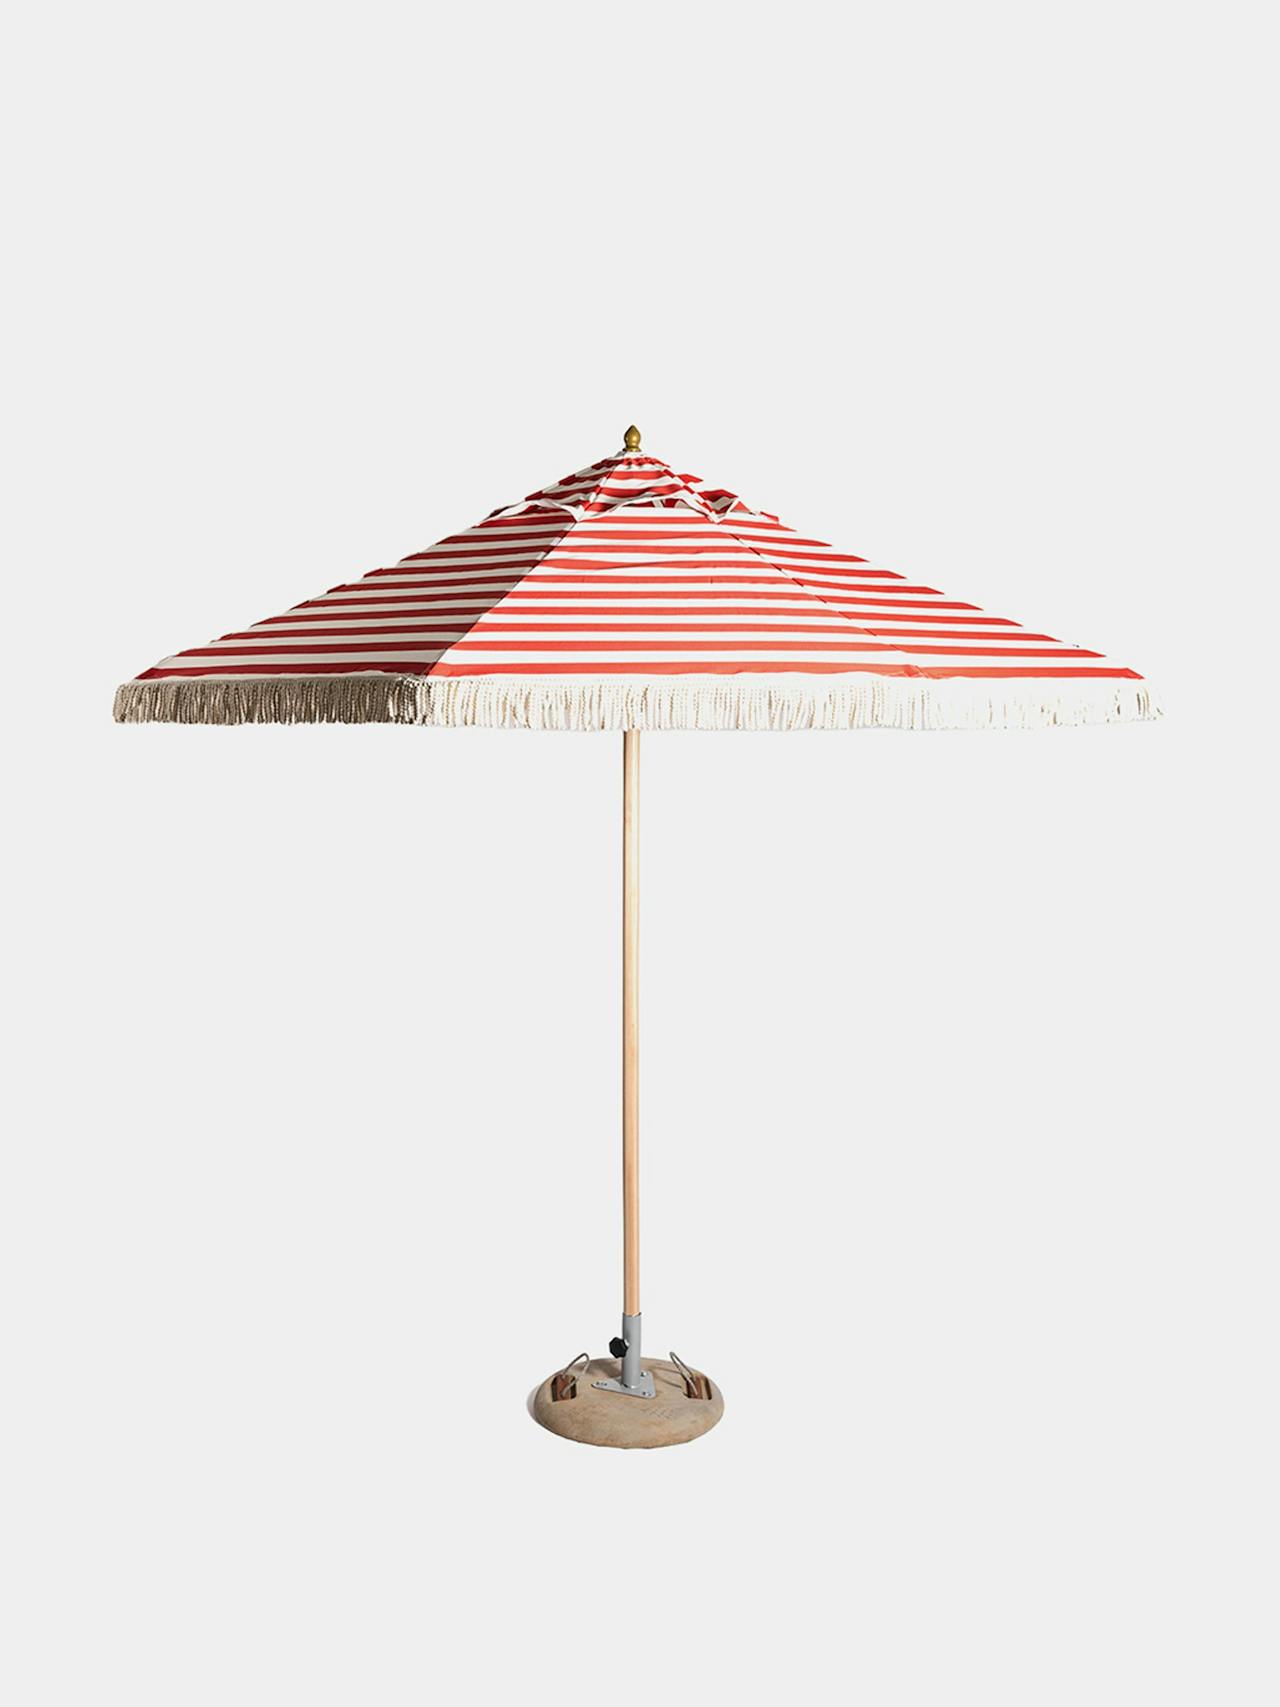 Parasol with tassels in red stripe, 300cm